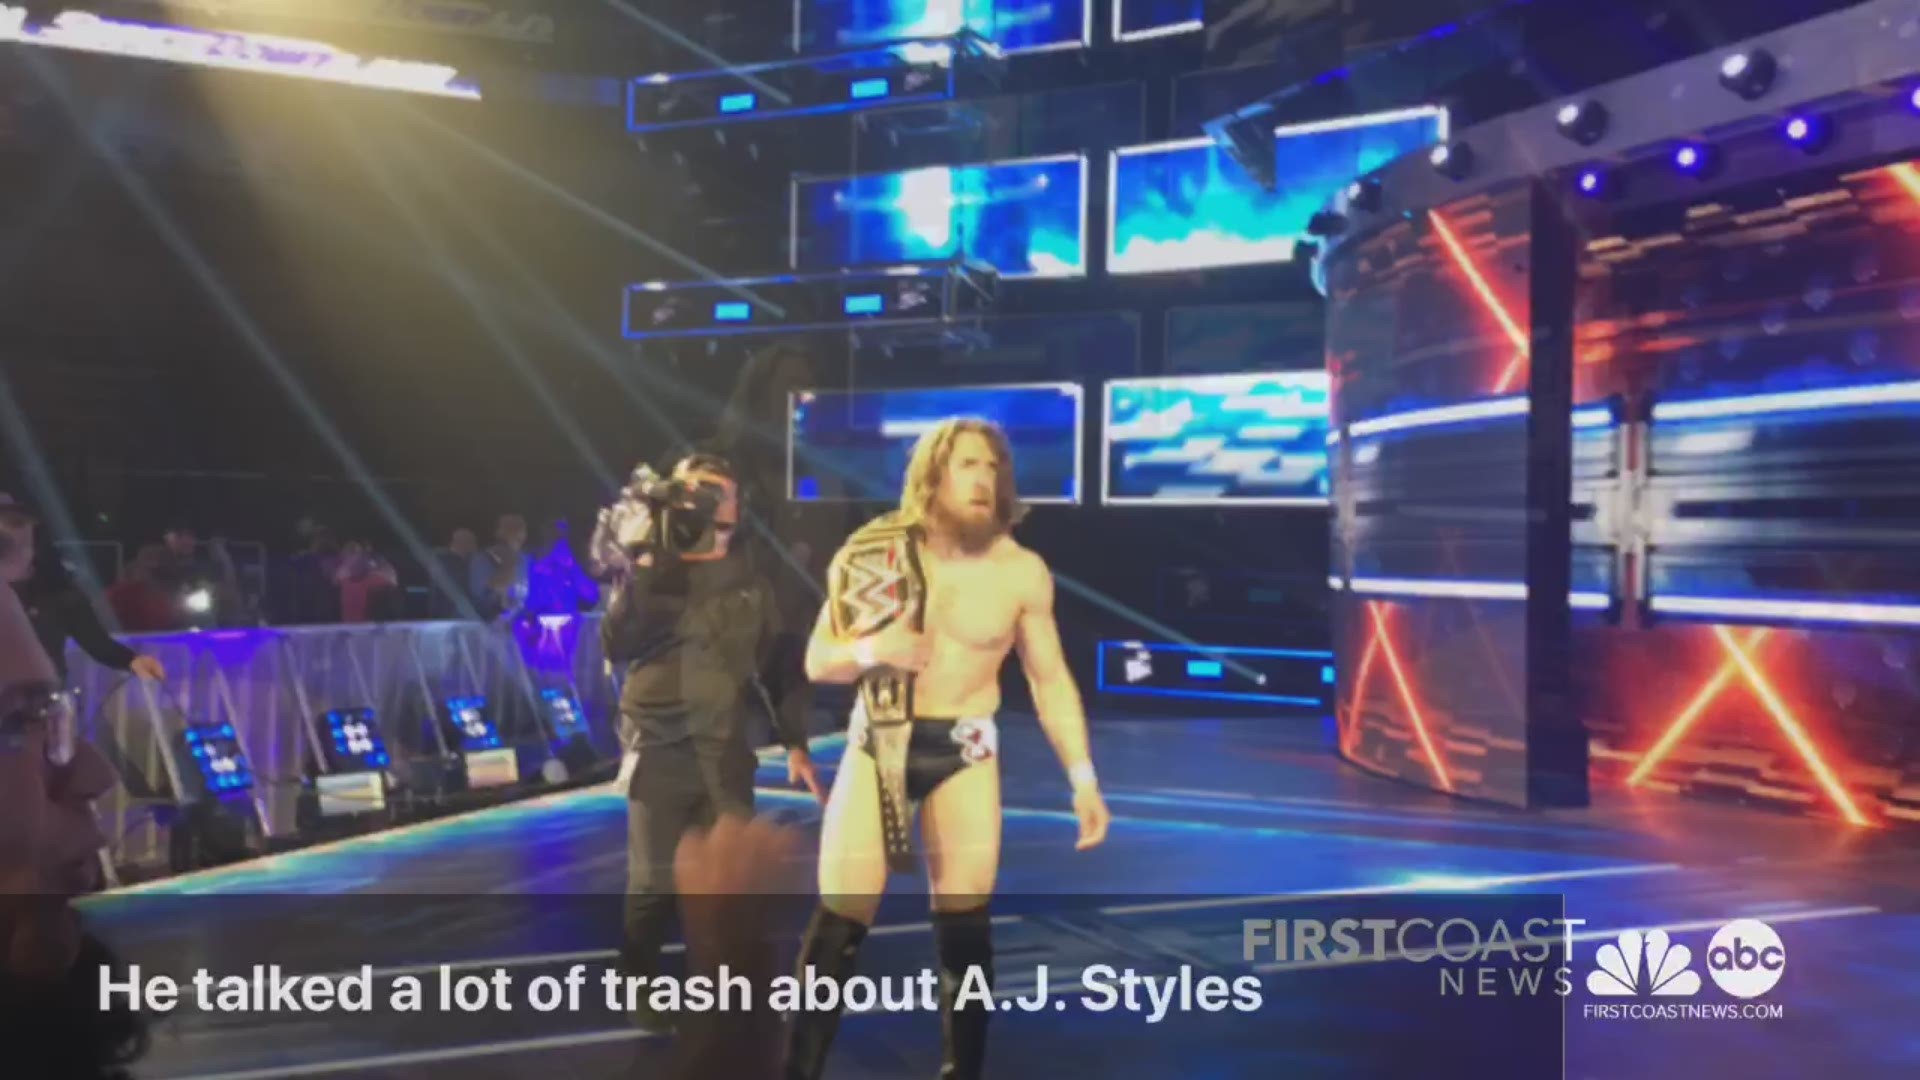 A.J. Styles took issue with some things 'The New' Daniel Bryan said Tuesday at WWE SmackDown Live in Jacksonville, Fla.